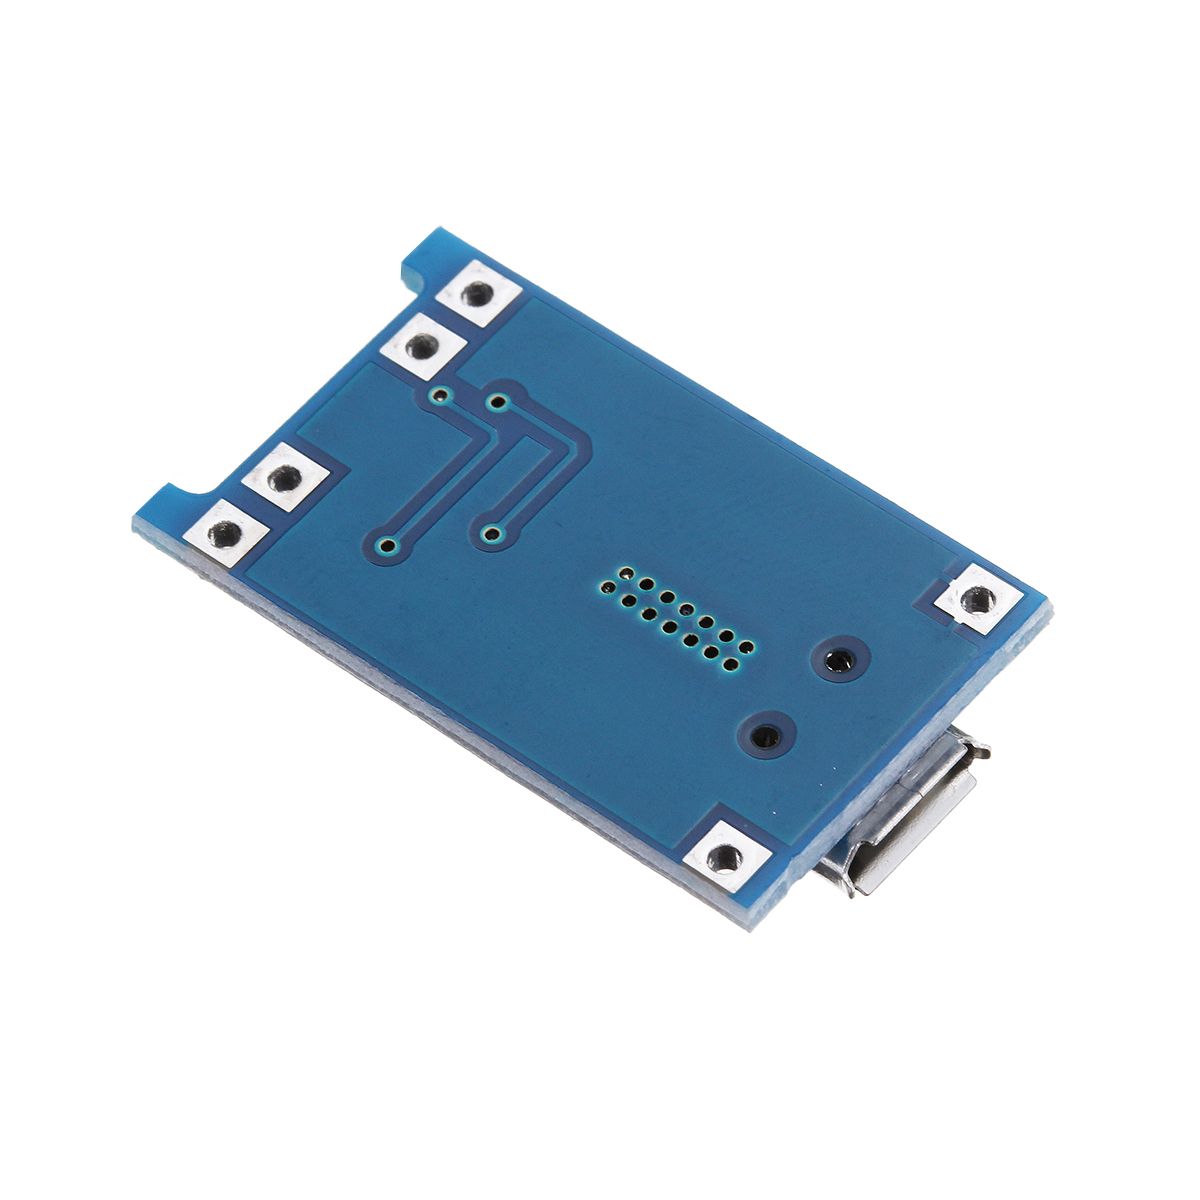 3Pcs-TP4056-Micro-USB-5V-1A-Lithium-Battery-Charging-Protection-Board-TE585-Lipo-Charger-Module-1734586